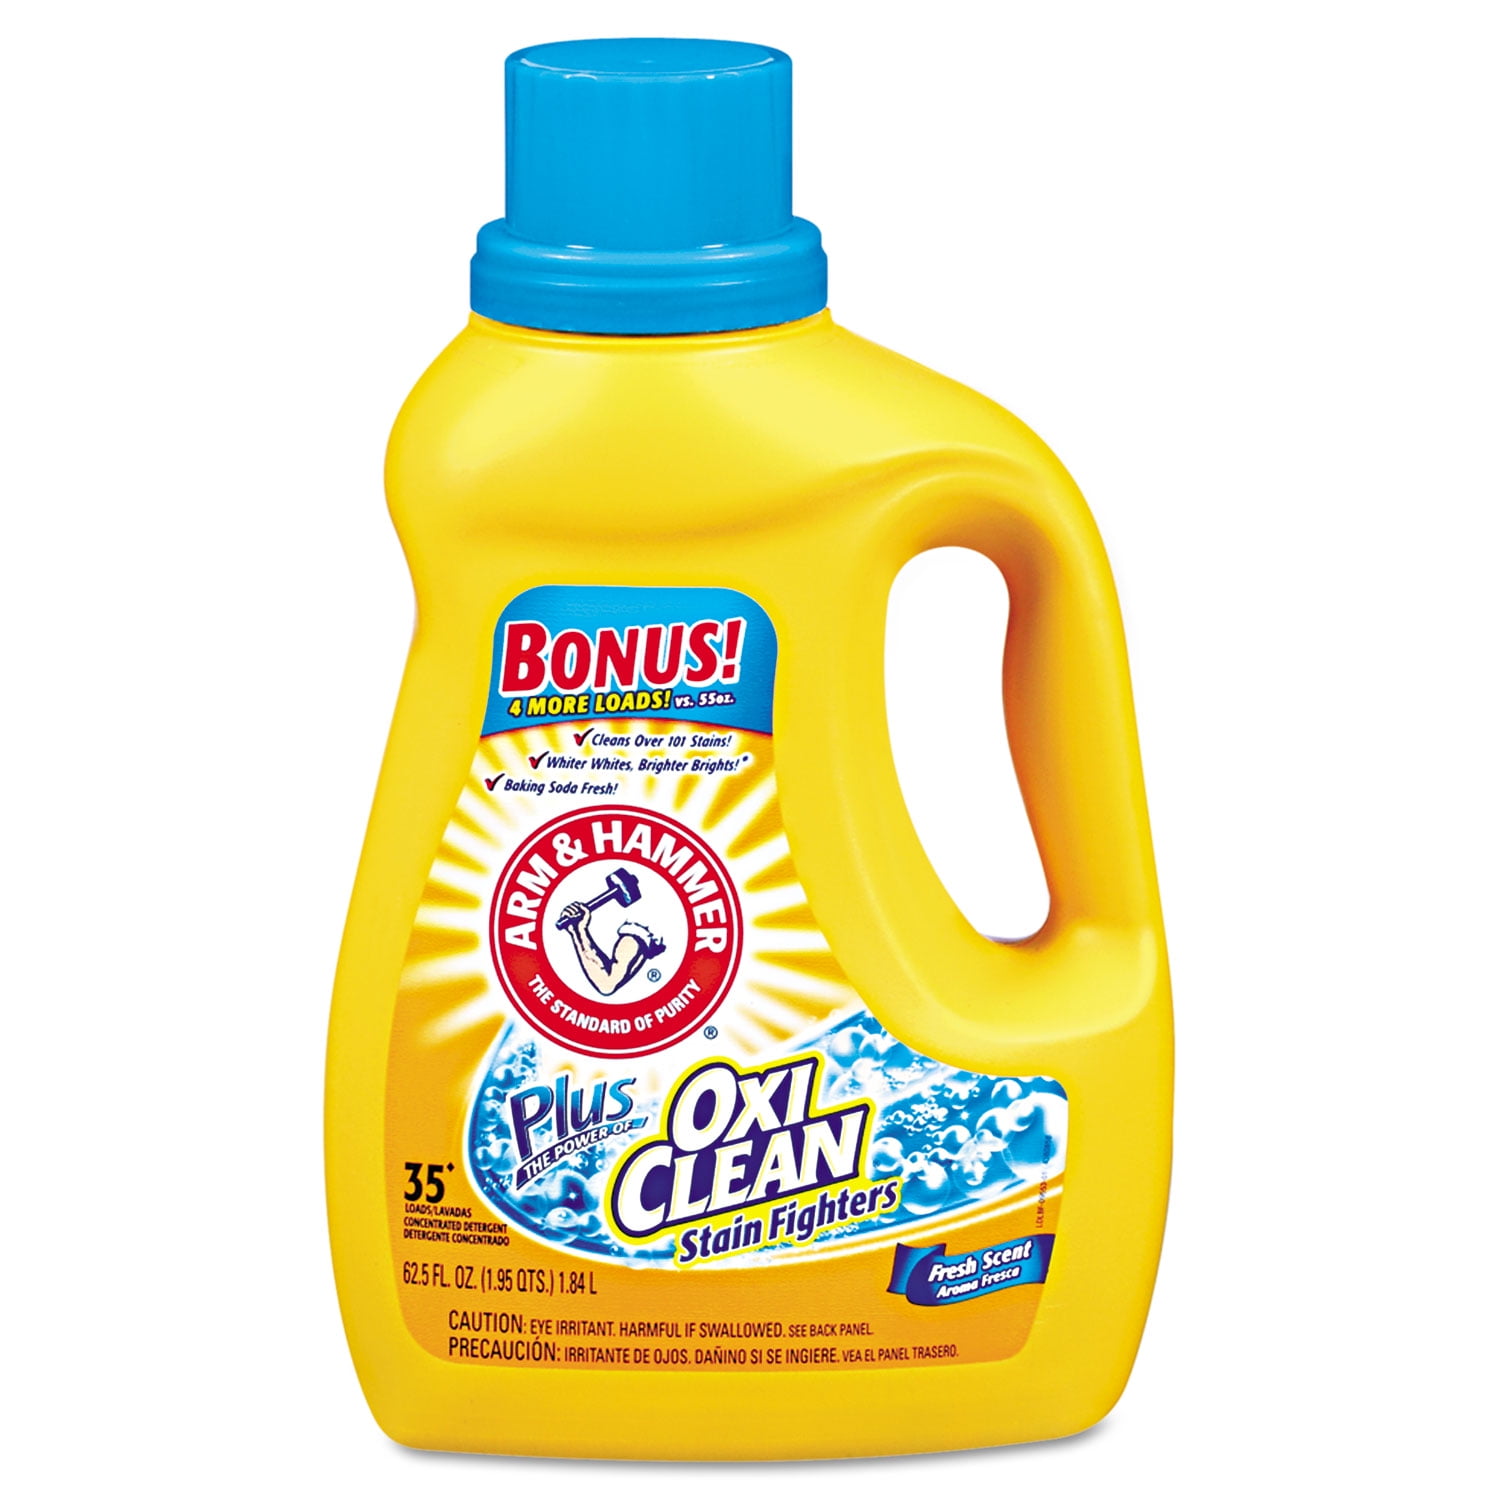 oxiclean-concentrated-liquid-laundry-detergent-fresh-61-25oz-bottle